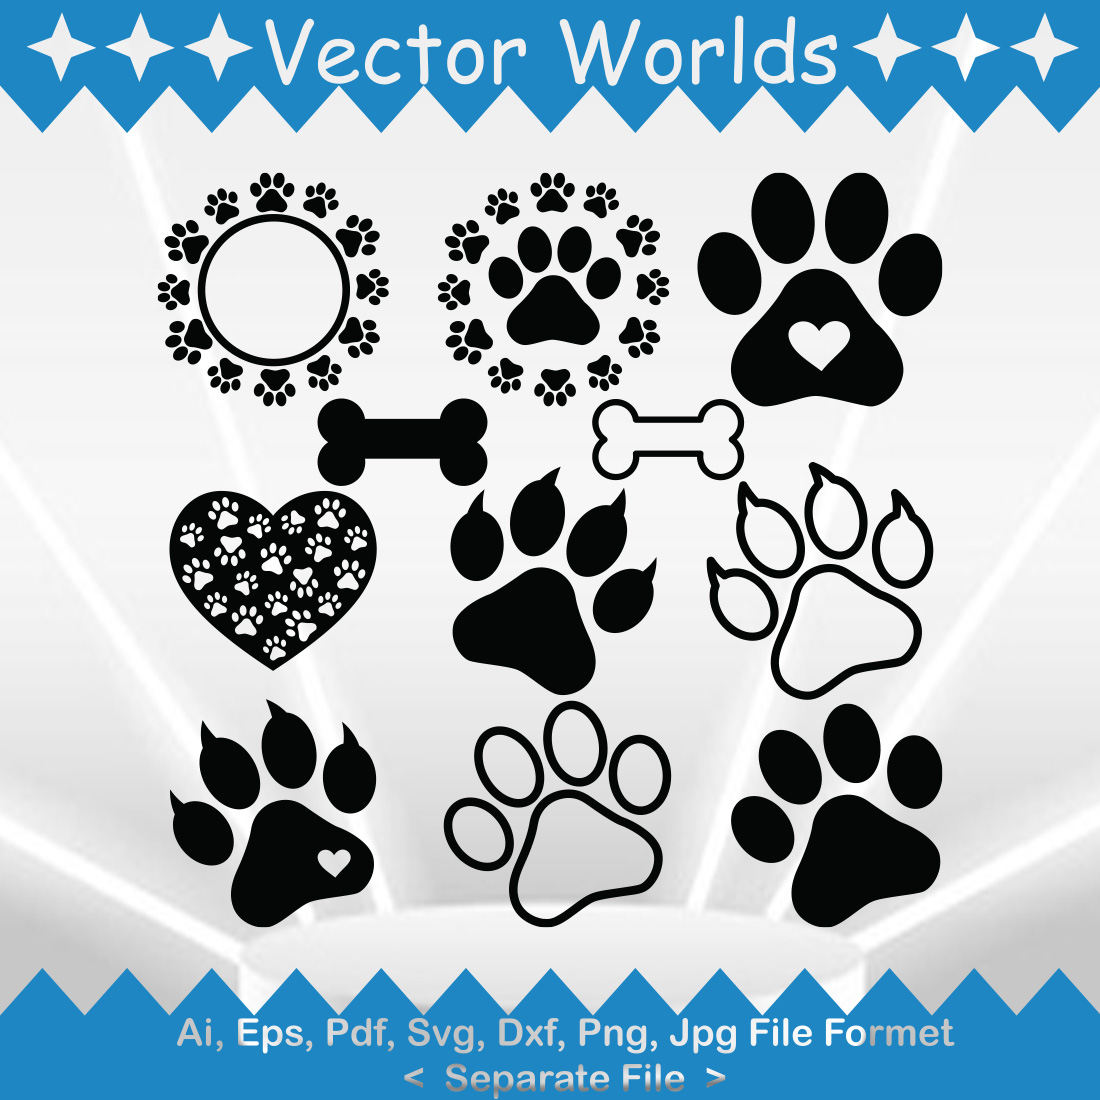 Paw Claws SVG Vector Design cover image.